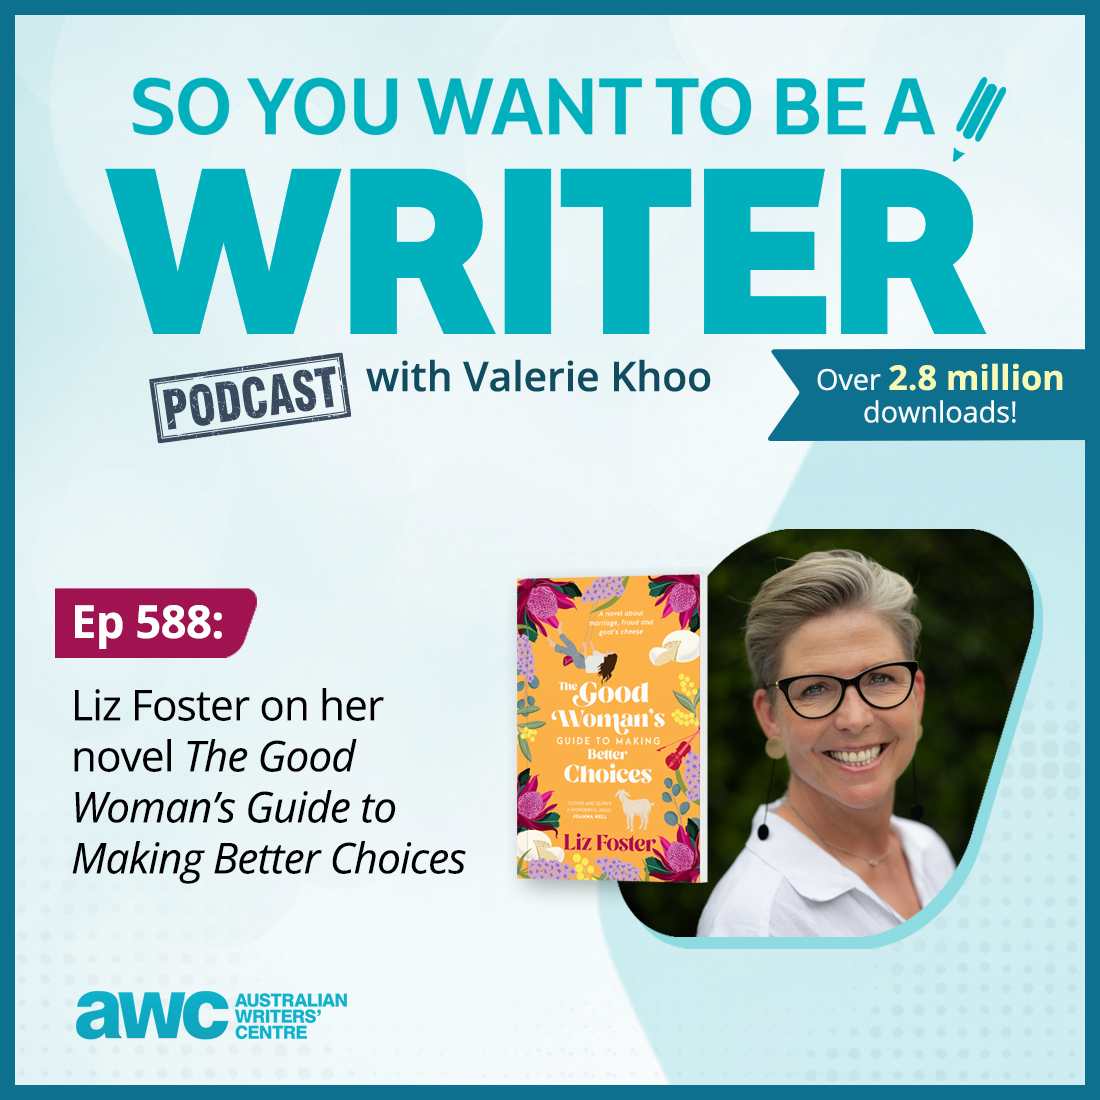 WRITER 588: Liz Foster on her novel ’The Good Woman’s Guide to Making Better Choices’